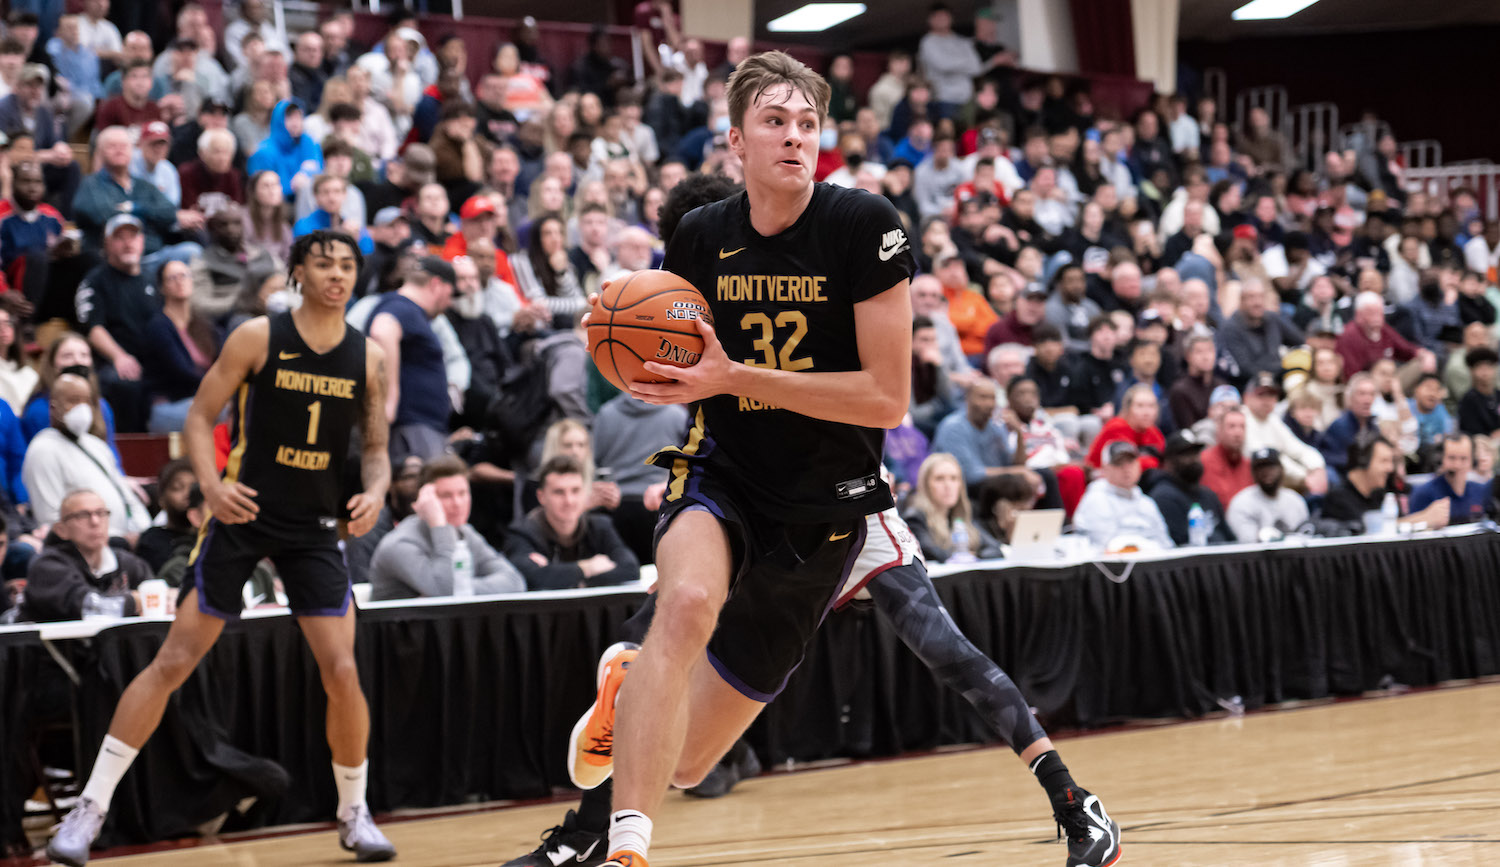 SPRINGFIELD, MA - JANUARY 16: Cooper Flagg of Montverde (32) drives to the basket during the Hoophall Classic high school basketball game between Montverde Academy and Sunrise Christian on January 16, 2023 at Blake Arena in Springfield, MA (Photo by John Jones/Icon Sportswire)